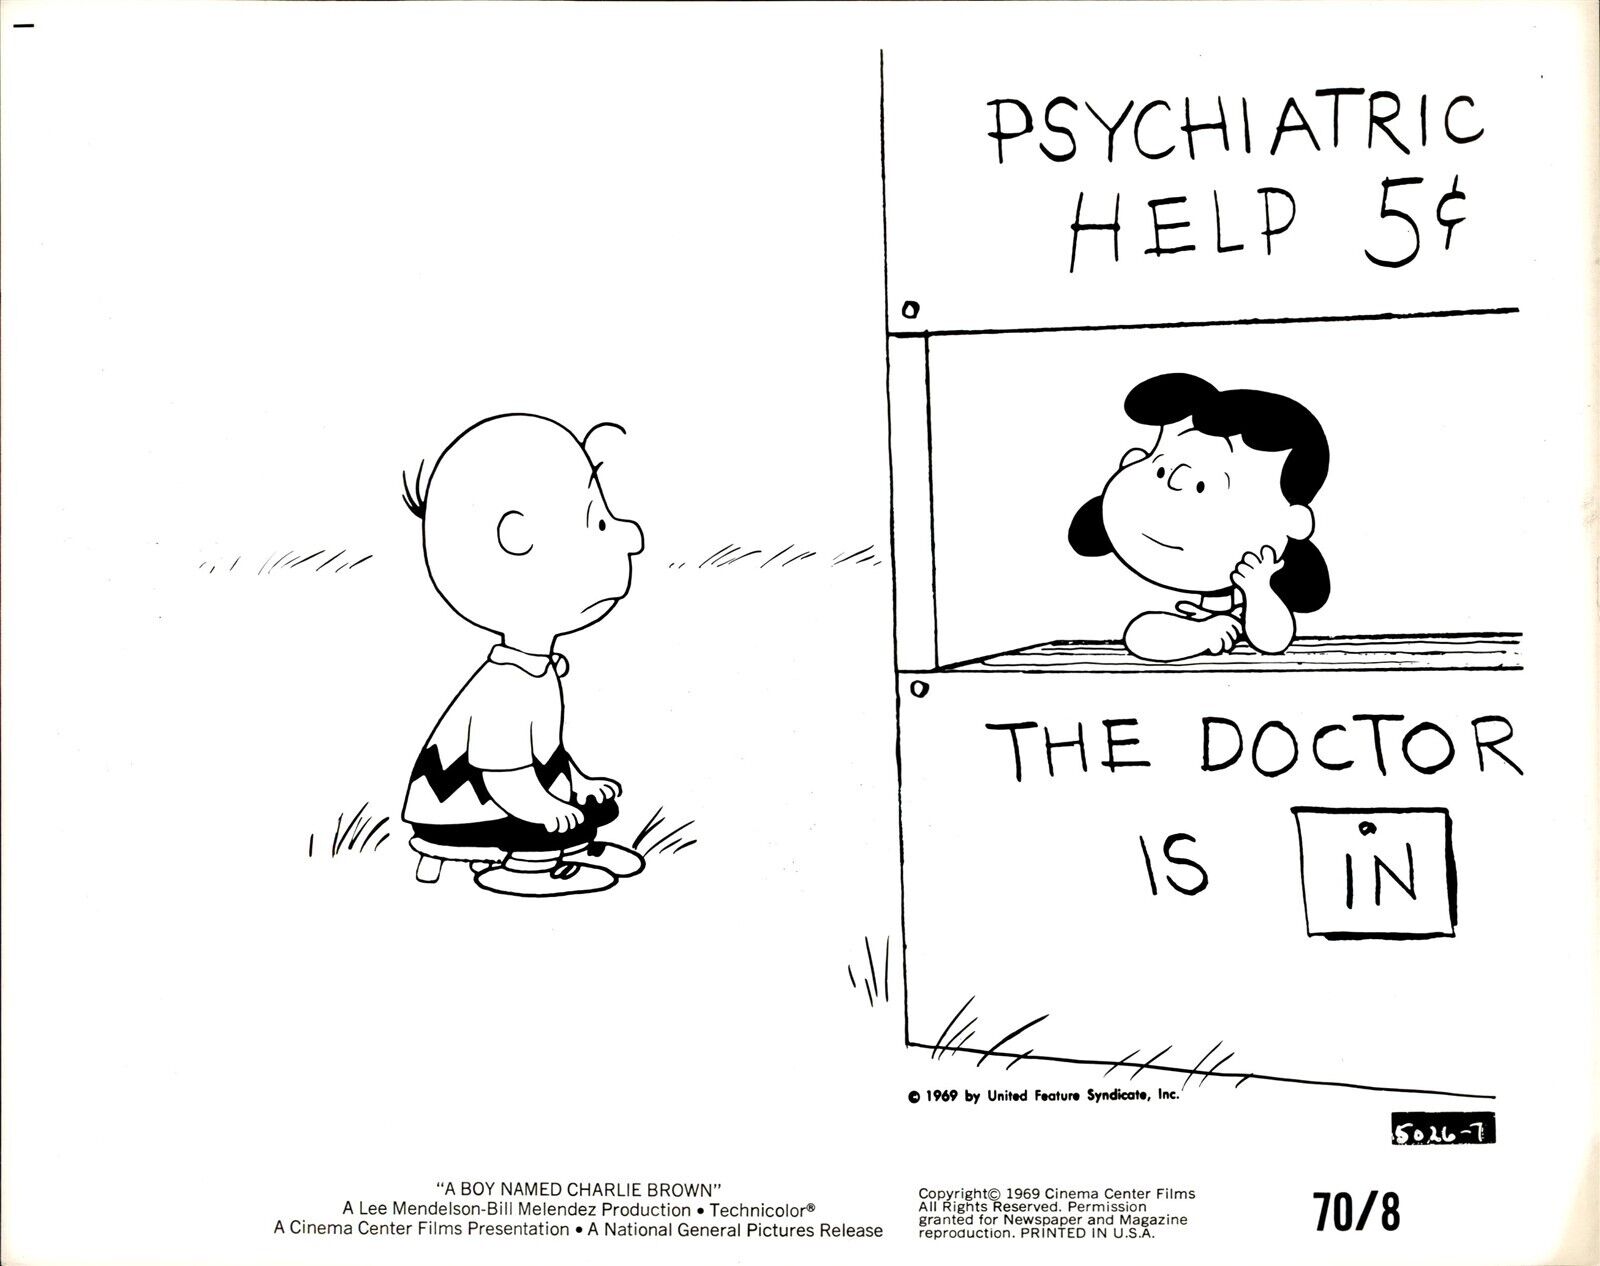 LV92 1969 Original Photo A BOY NAMED CHARLIE BROWN Lucy Psychiatric Help Booth